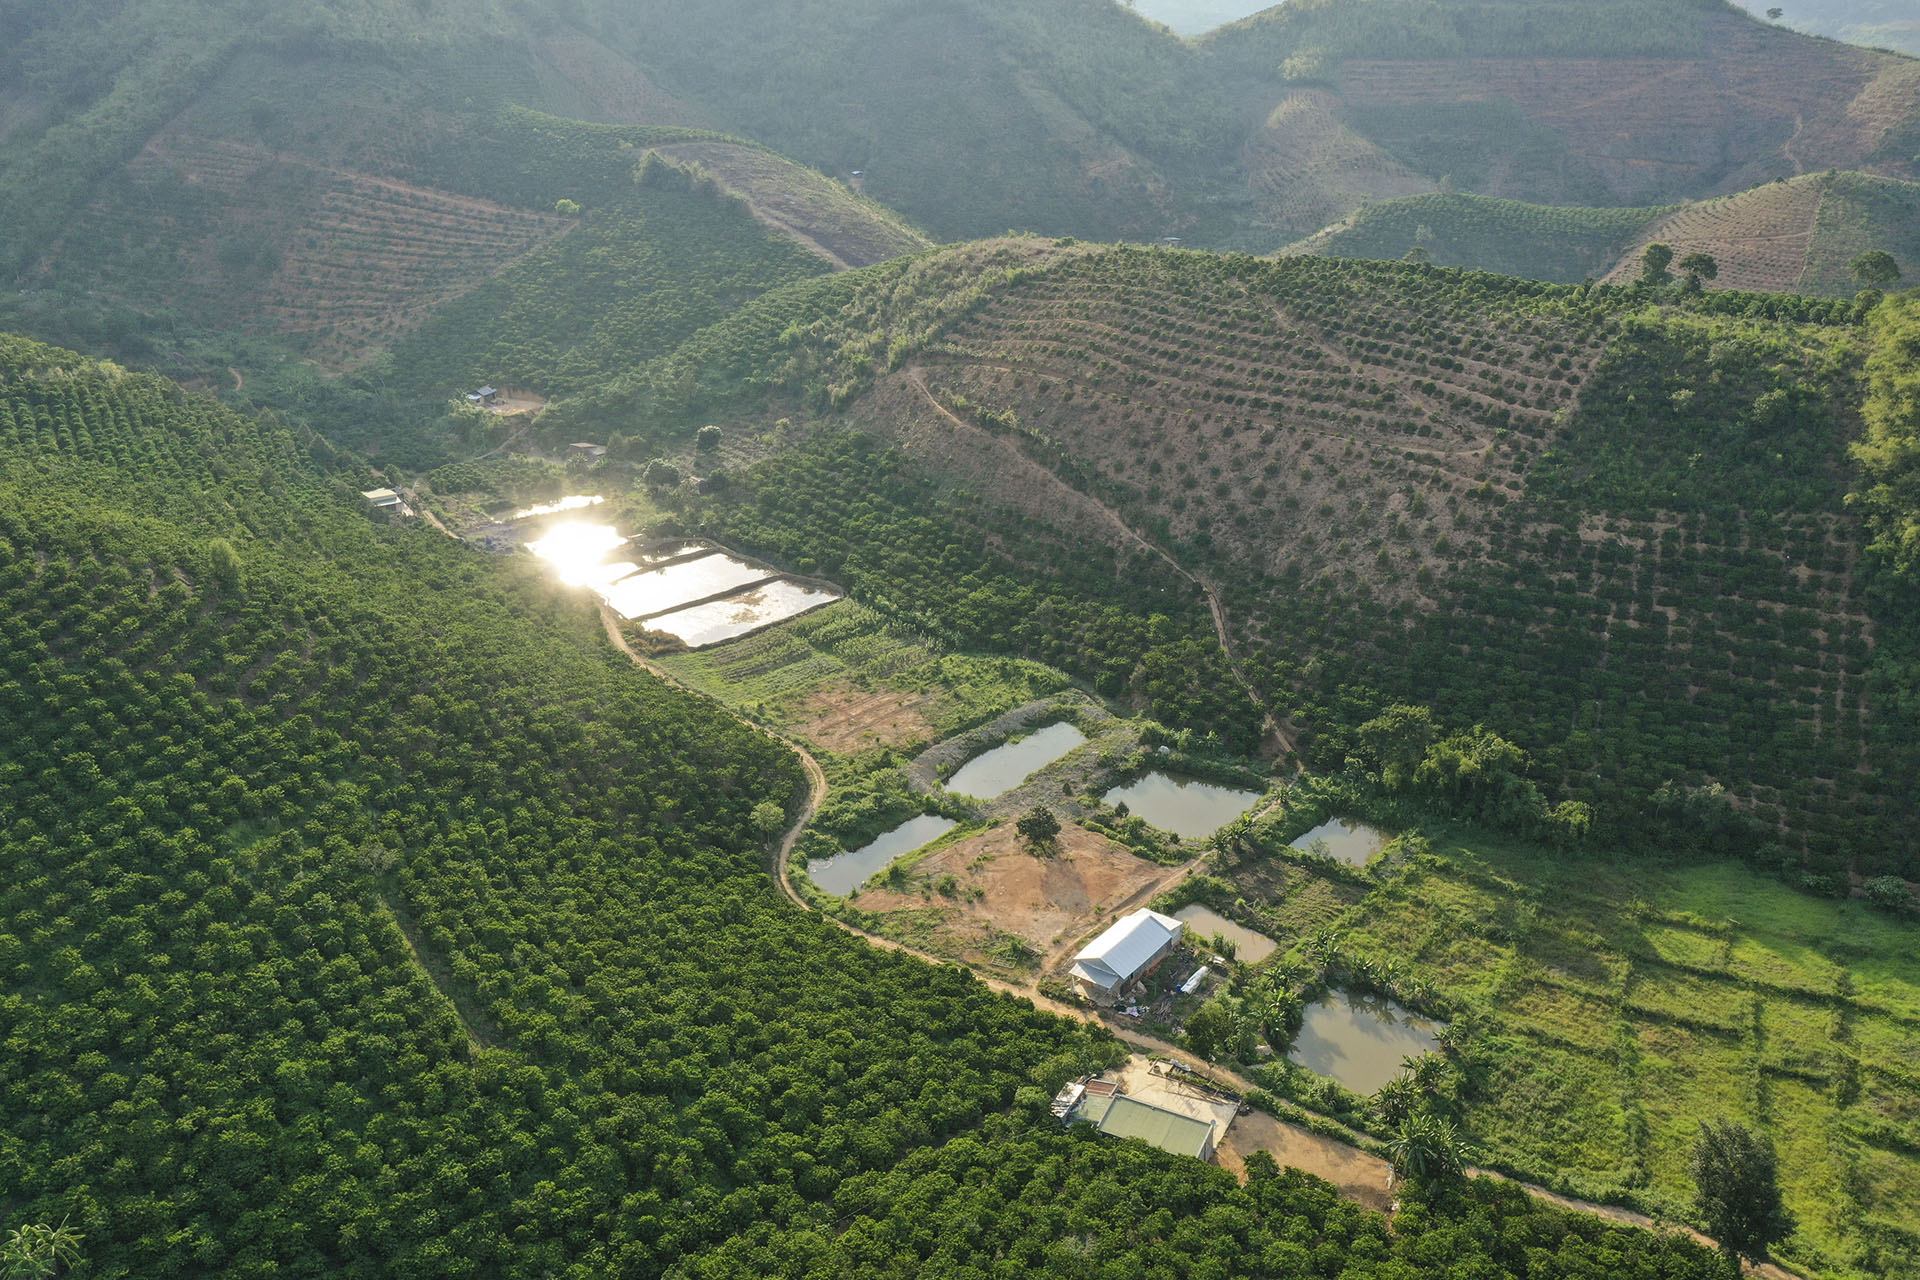 The Central Highlands region is an agricultural hub for Viet Nam. Photo credit: Cory Wright/UN-REDD Programme